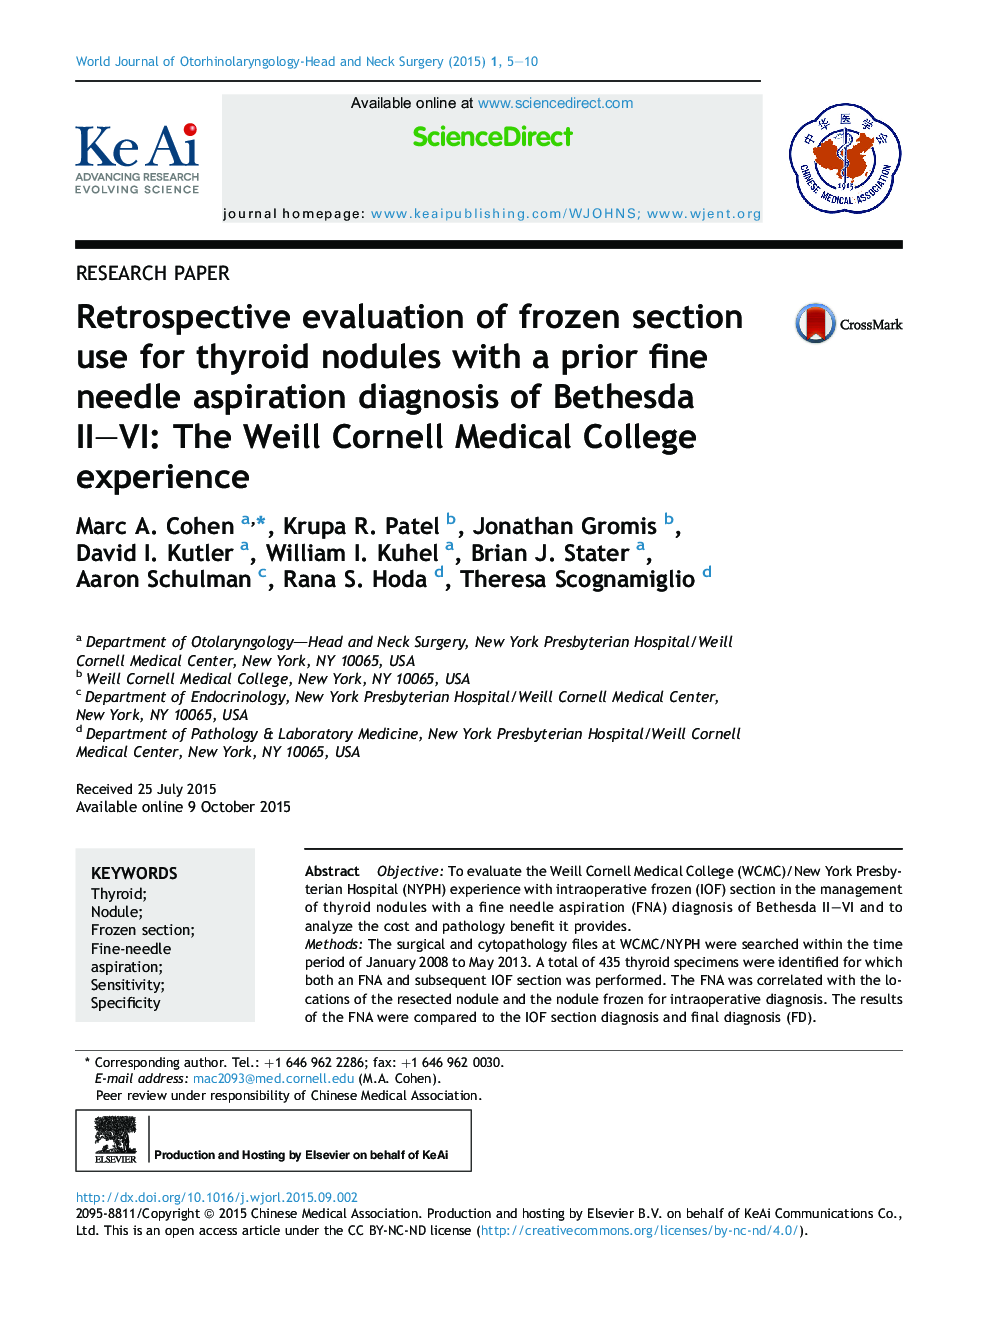 Retrospective evaluation of frozen section use for thyroid nodules with a prior fine needle aspiration diagnosis of Bethesda II–VI: The Weill Cornell Medical College experience 